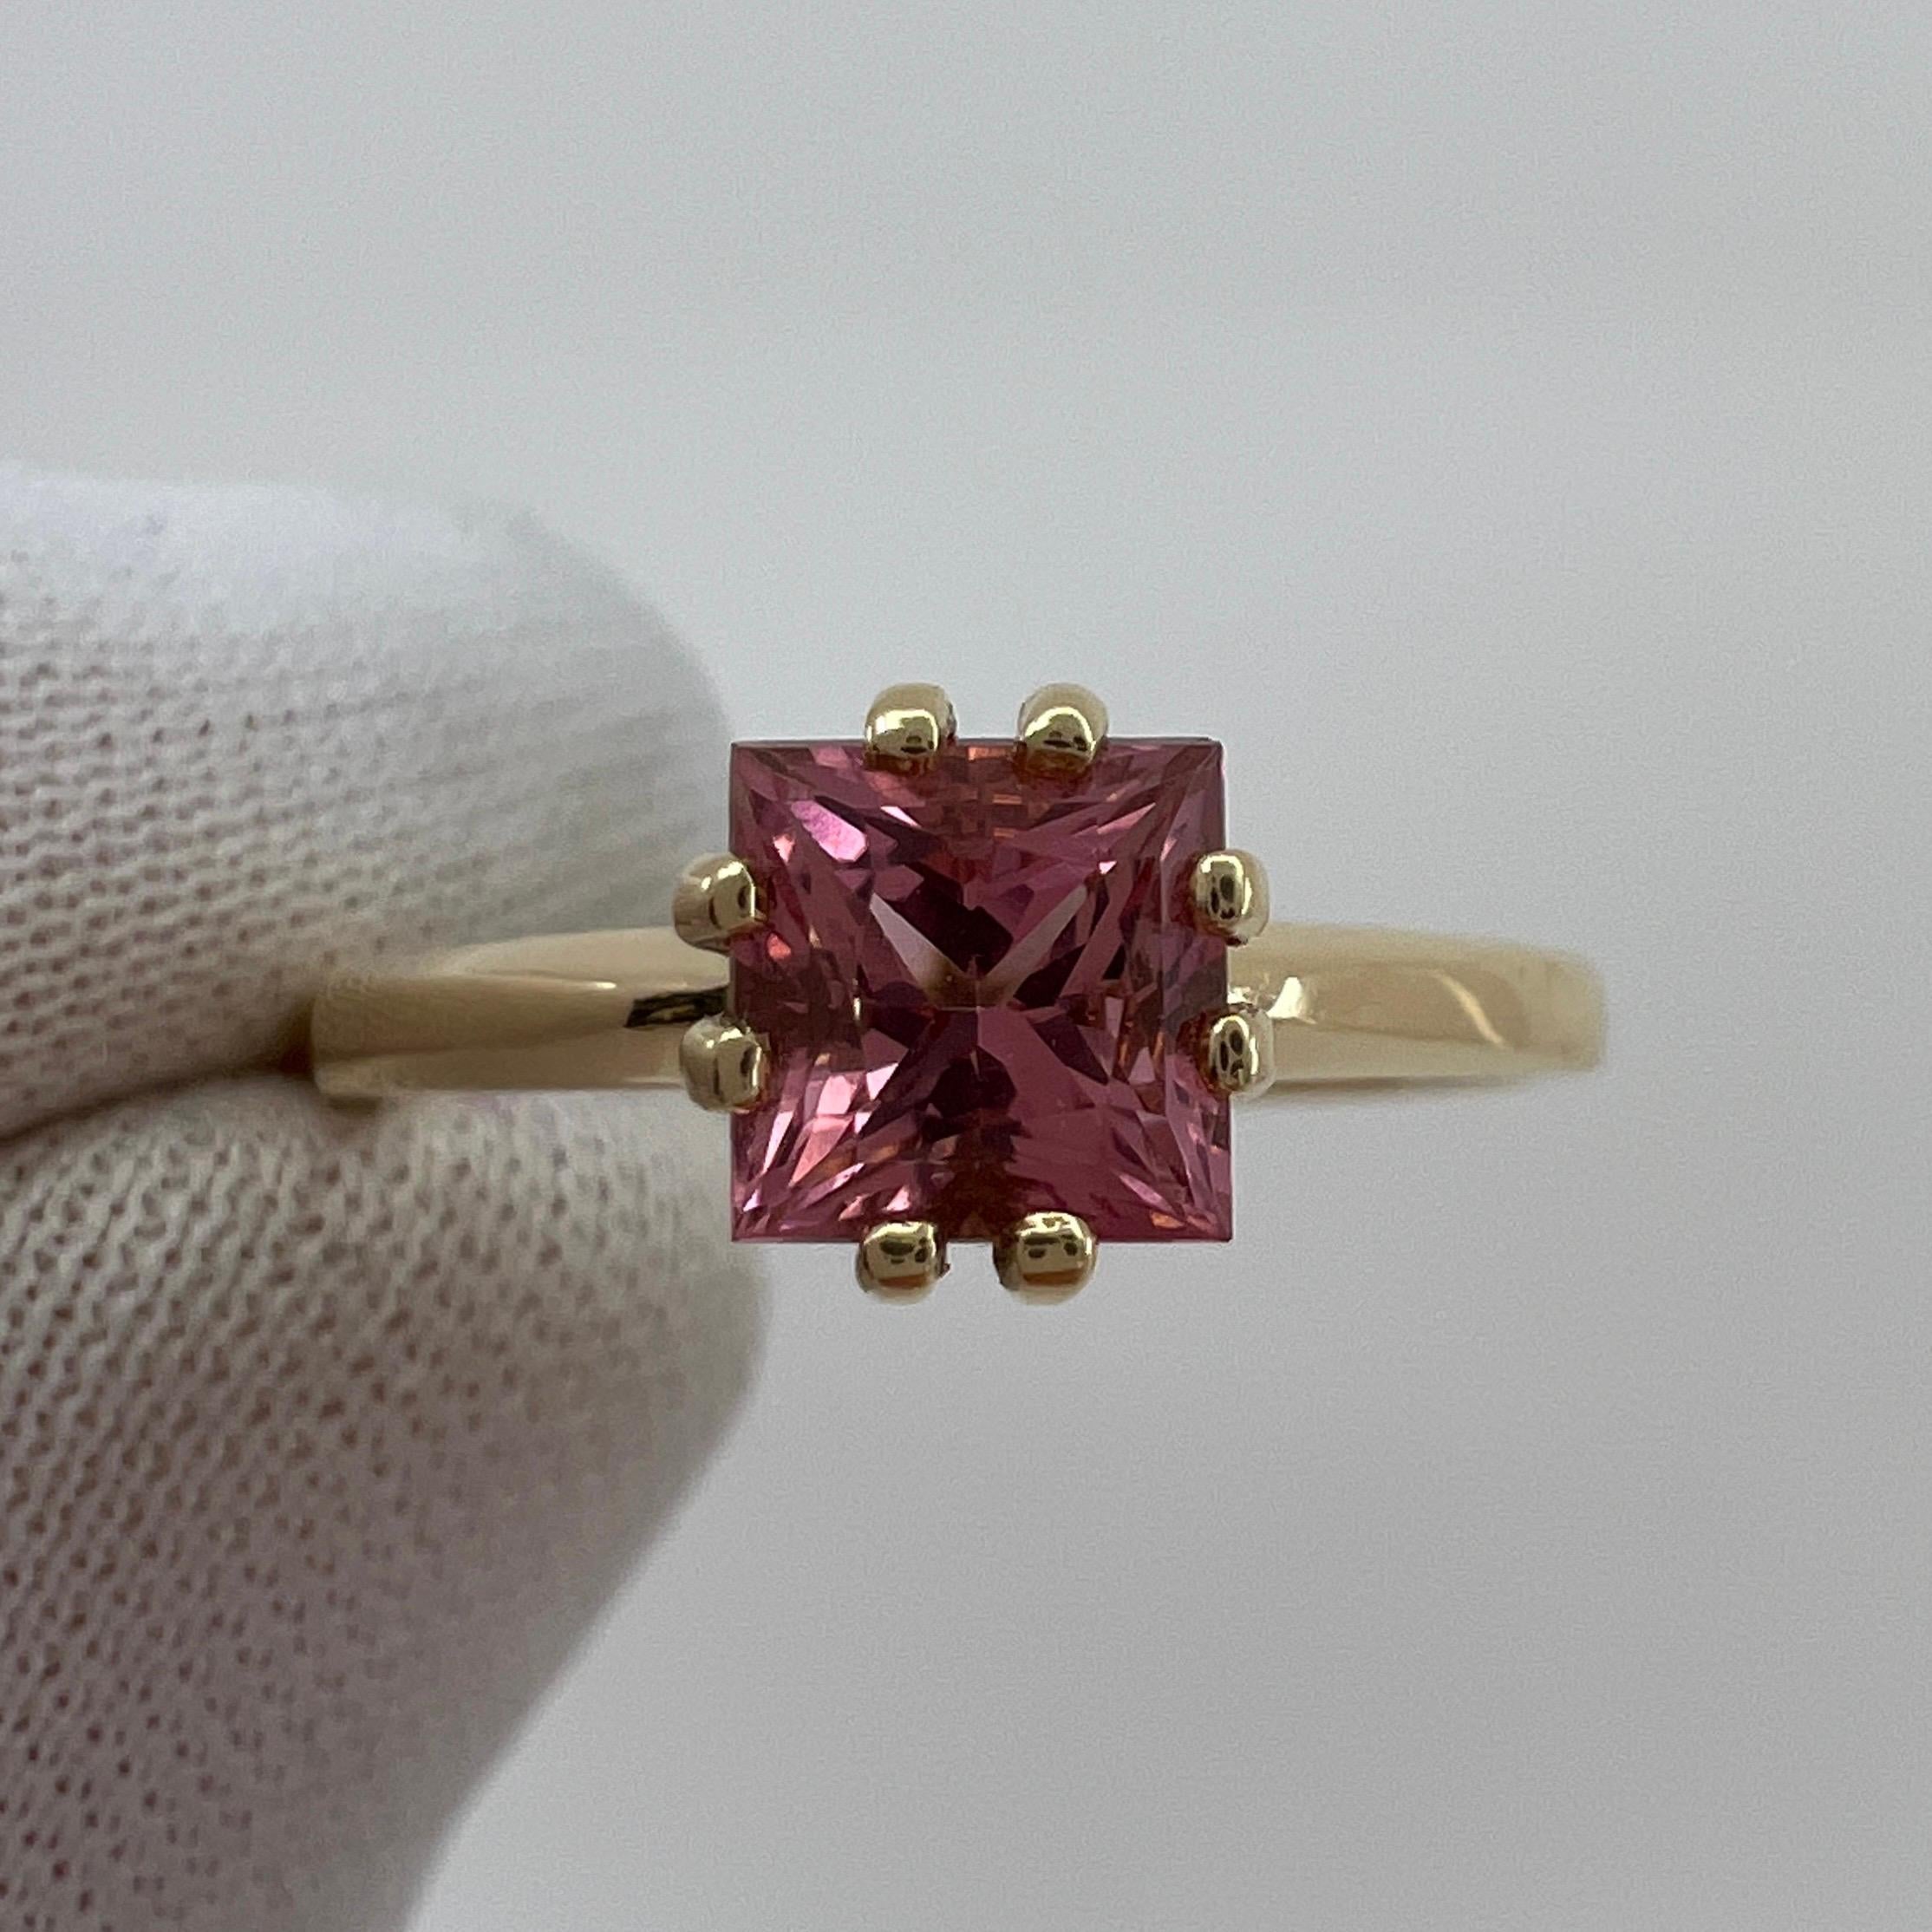 Vivid Pink Tourmaline Fine Custom Princess Cut Yellow Gold Solitaire Ring

0.80 Carat tourmaline with stunning colour, very bright and vivid. Measuring 5mm and approx. 0.80 carat.

Totally untreated and unheated with a unique custom princess